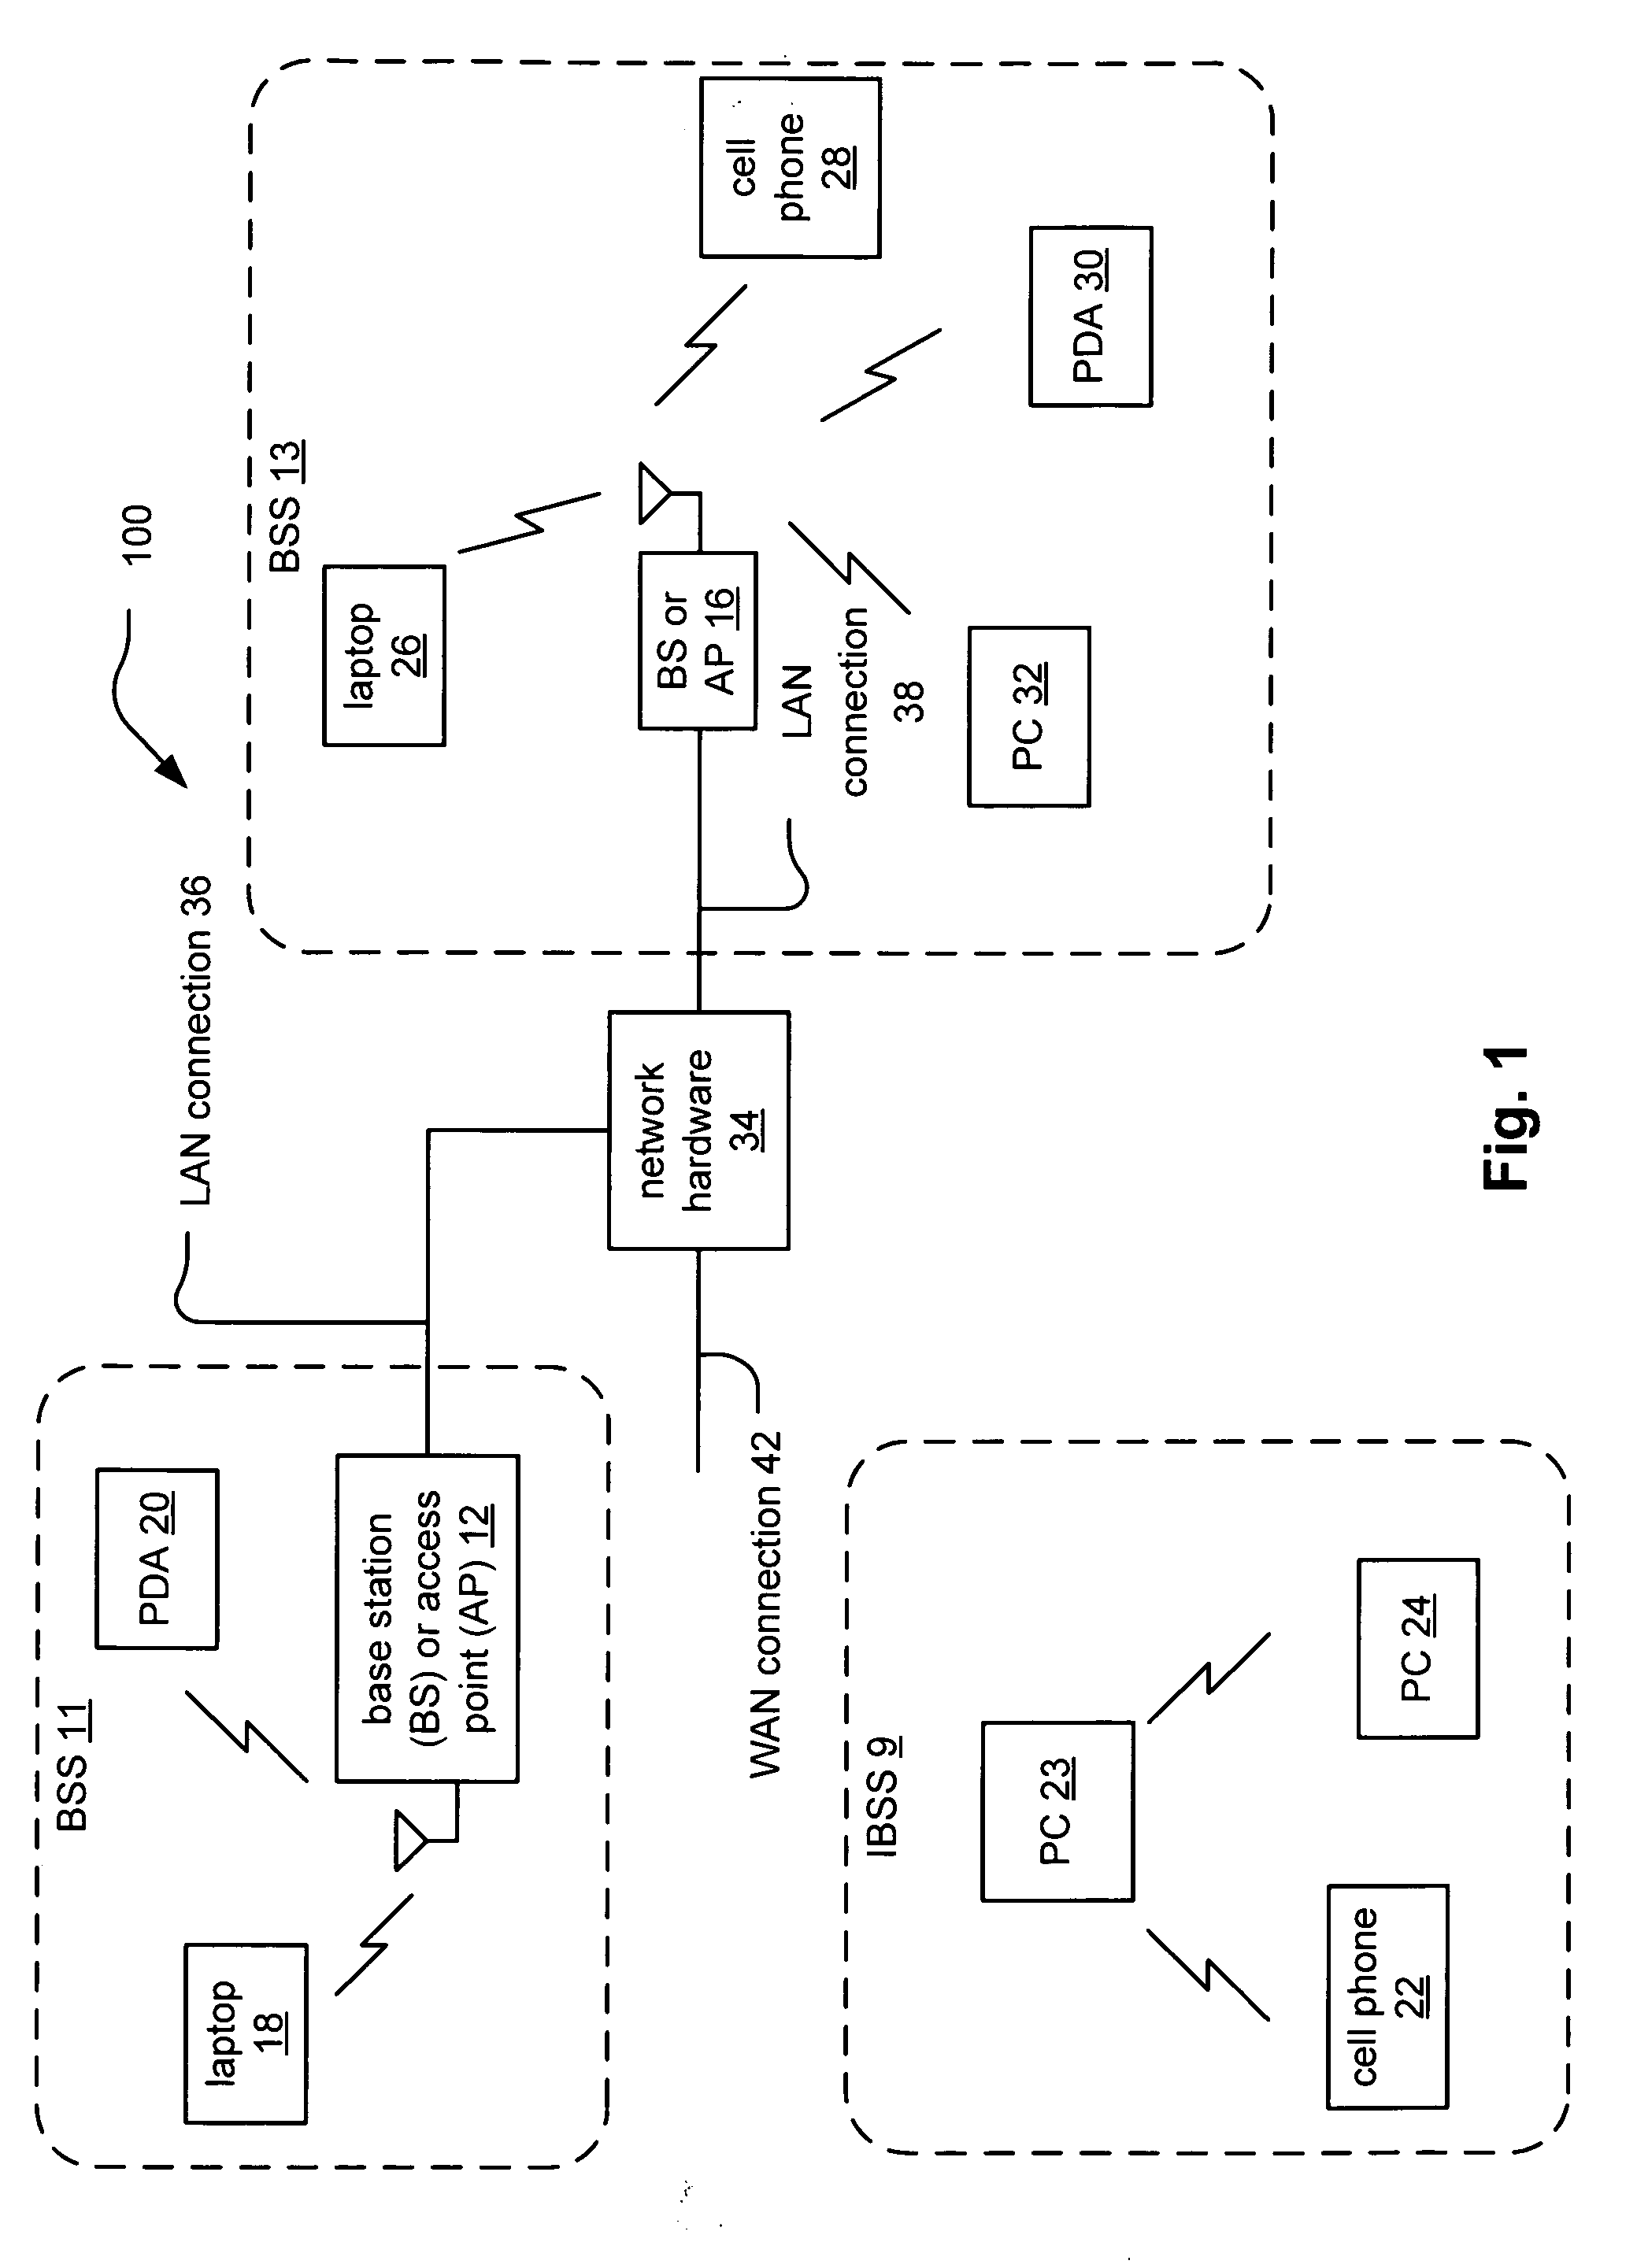 MIMO timing recovery